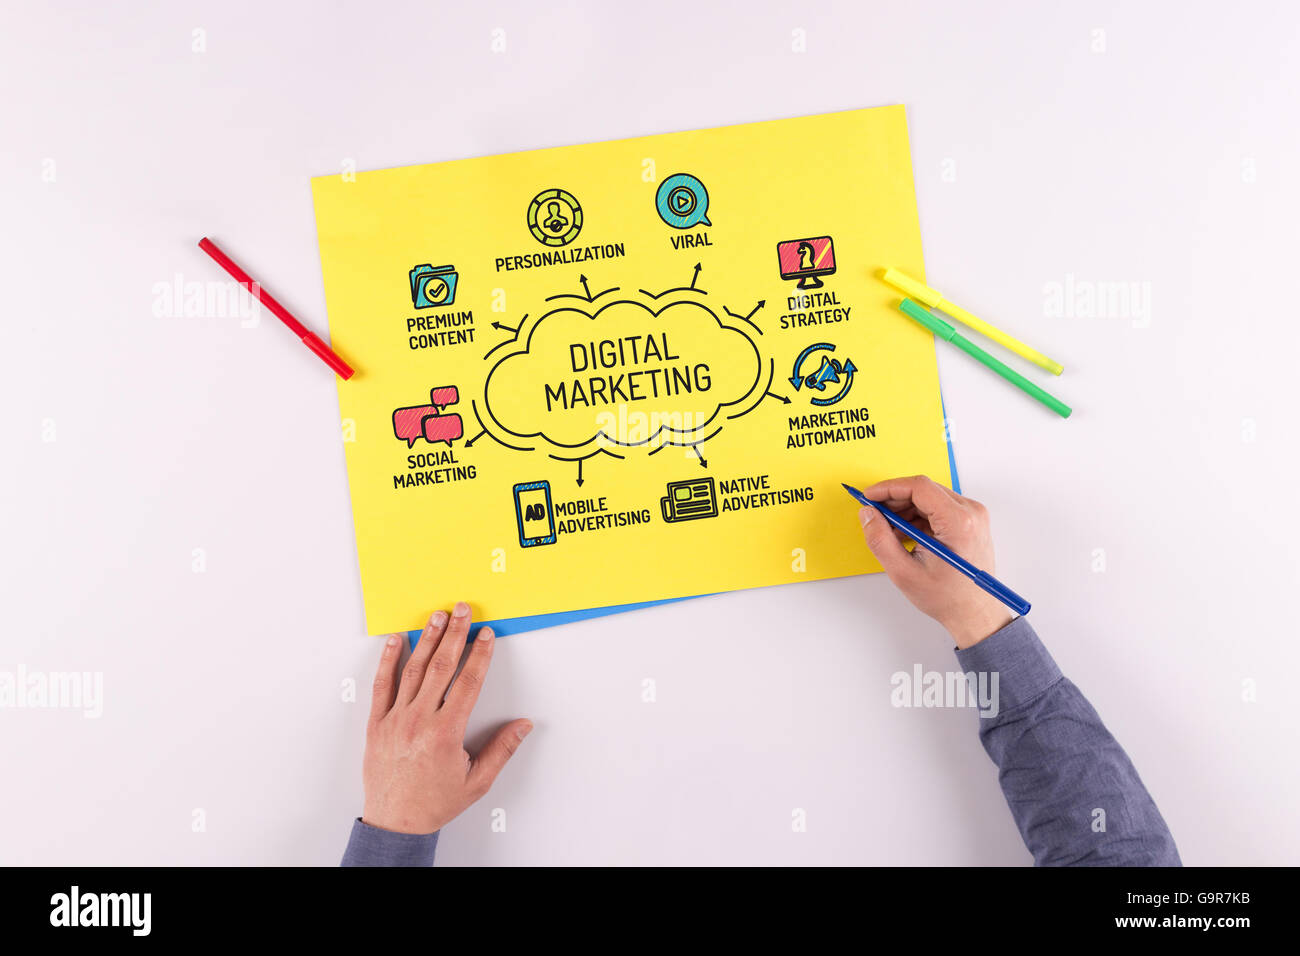 Digital Marketing chart with keywords and sketch icons Stock Photo